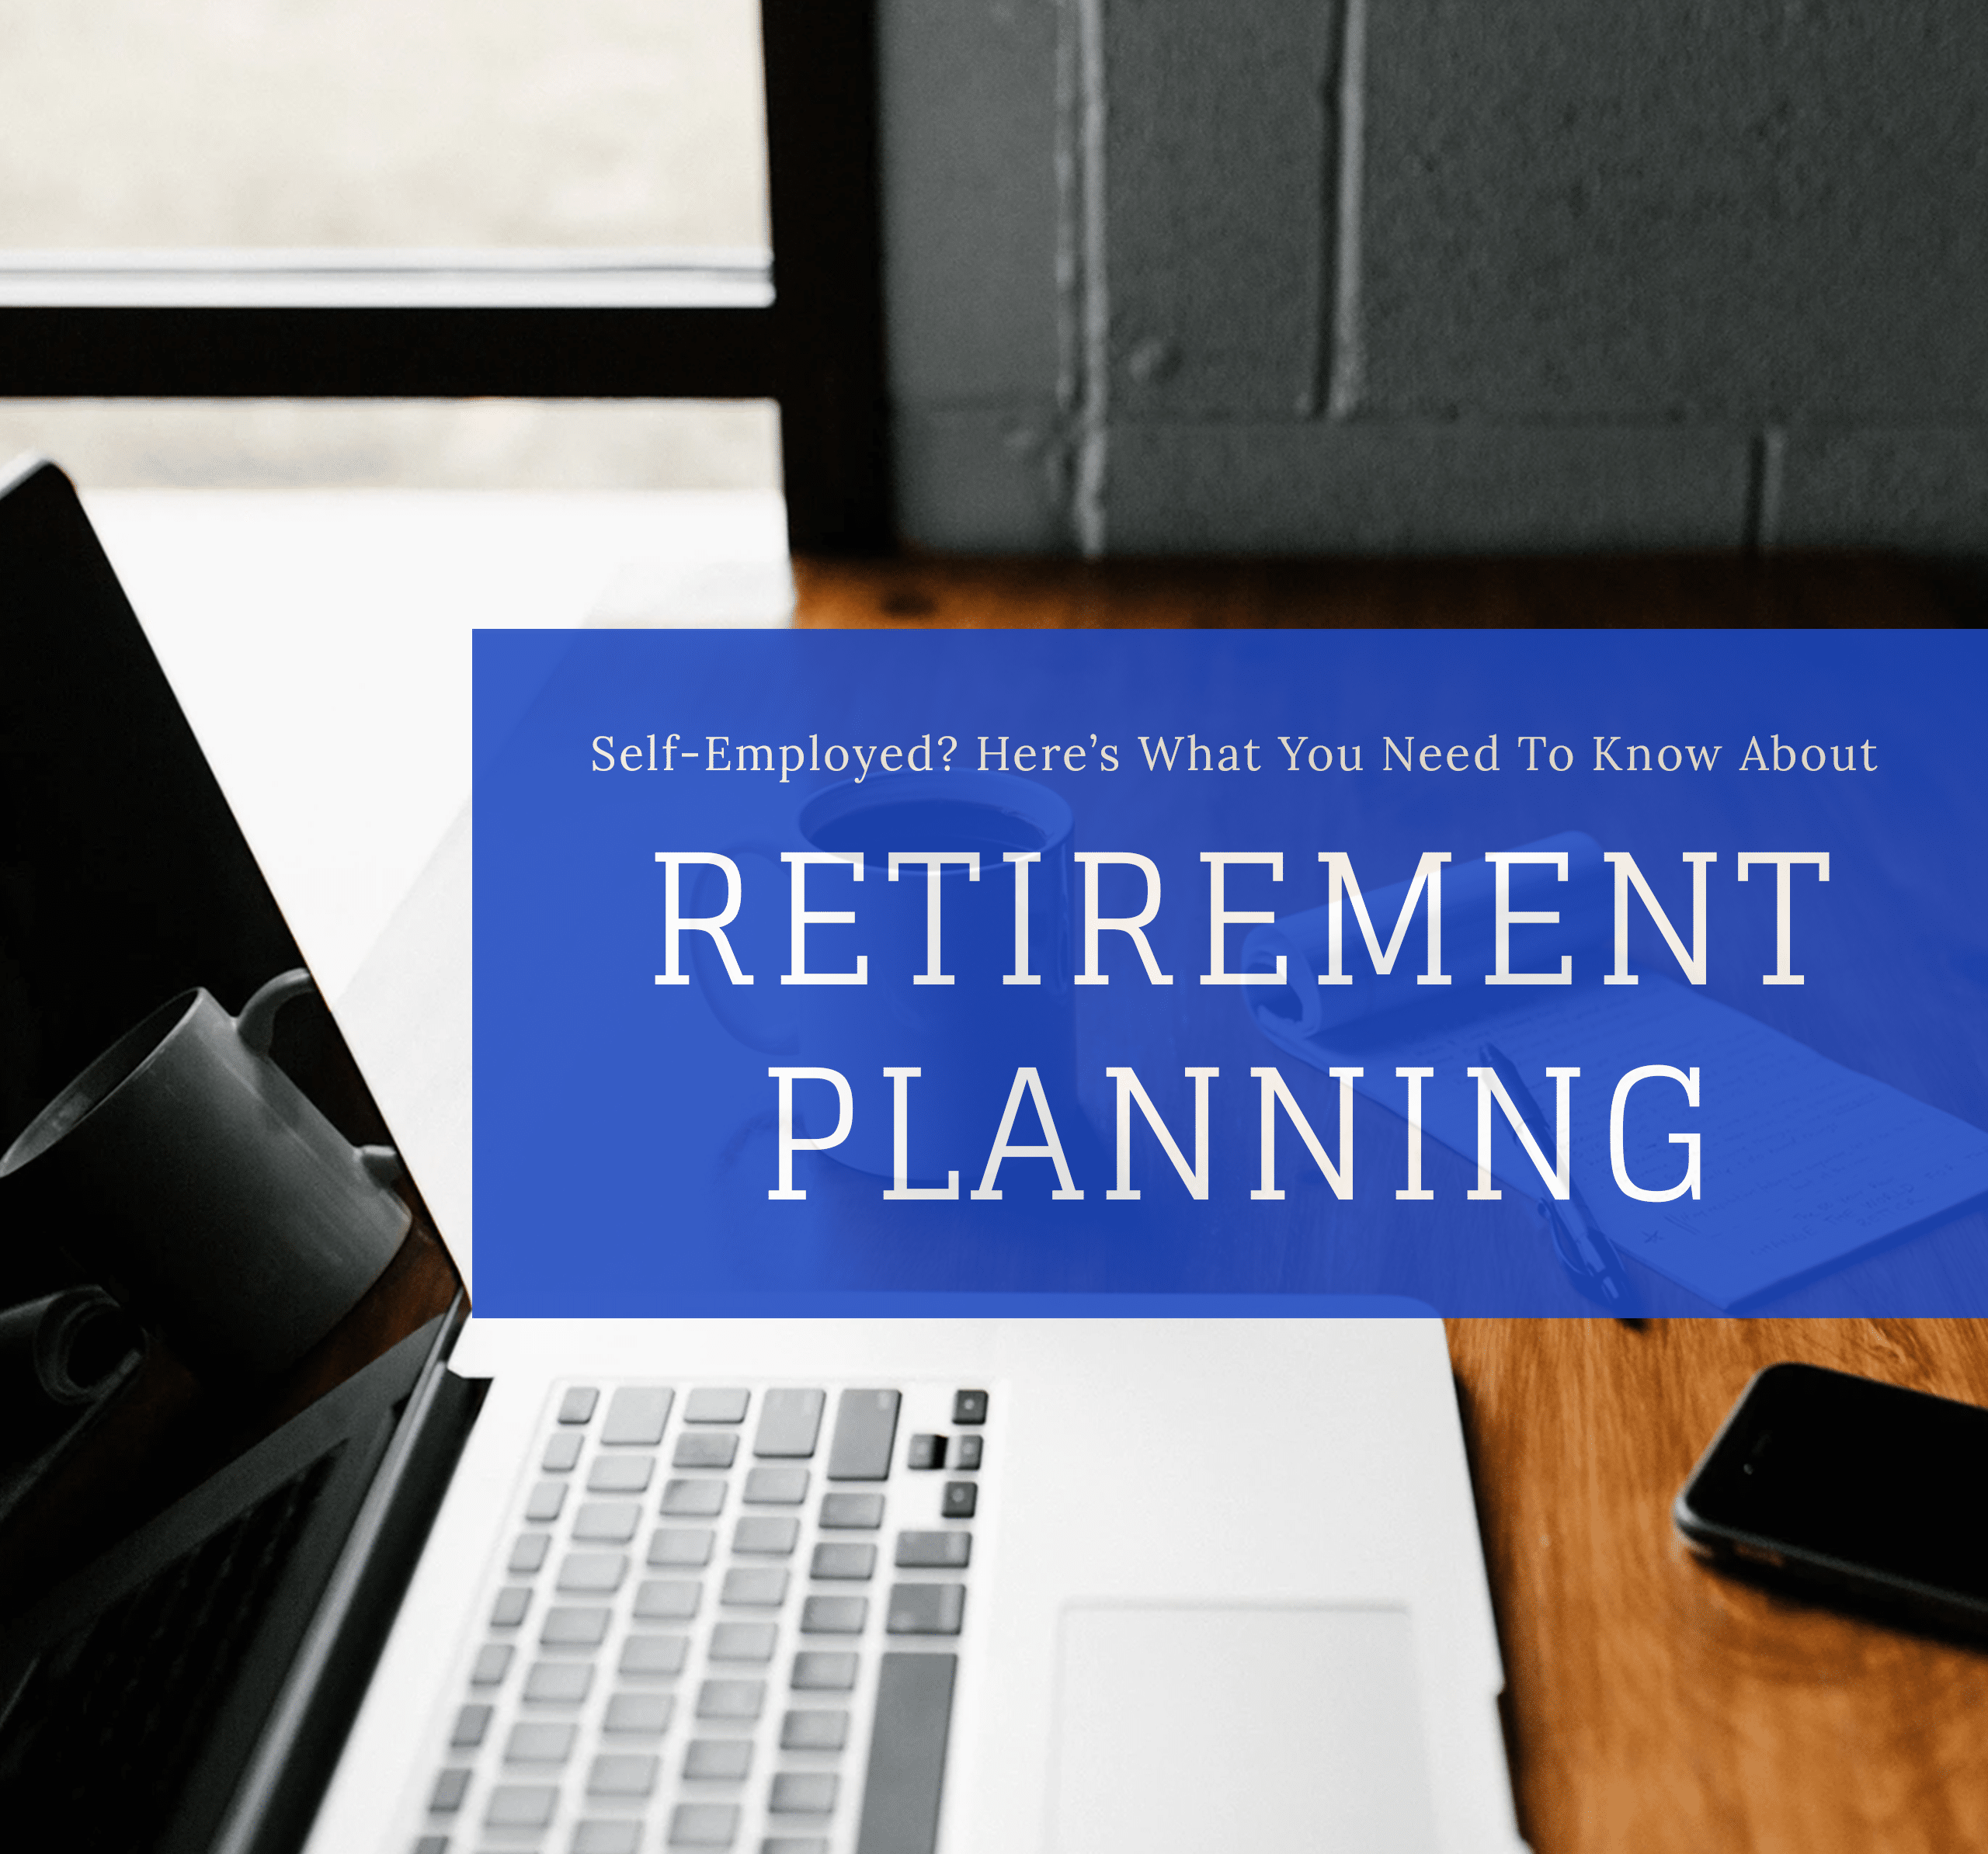 Self-Employed? Here’s What You Need To Know About Retirement Planning